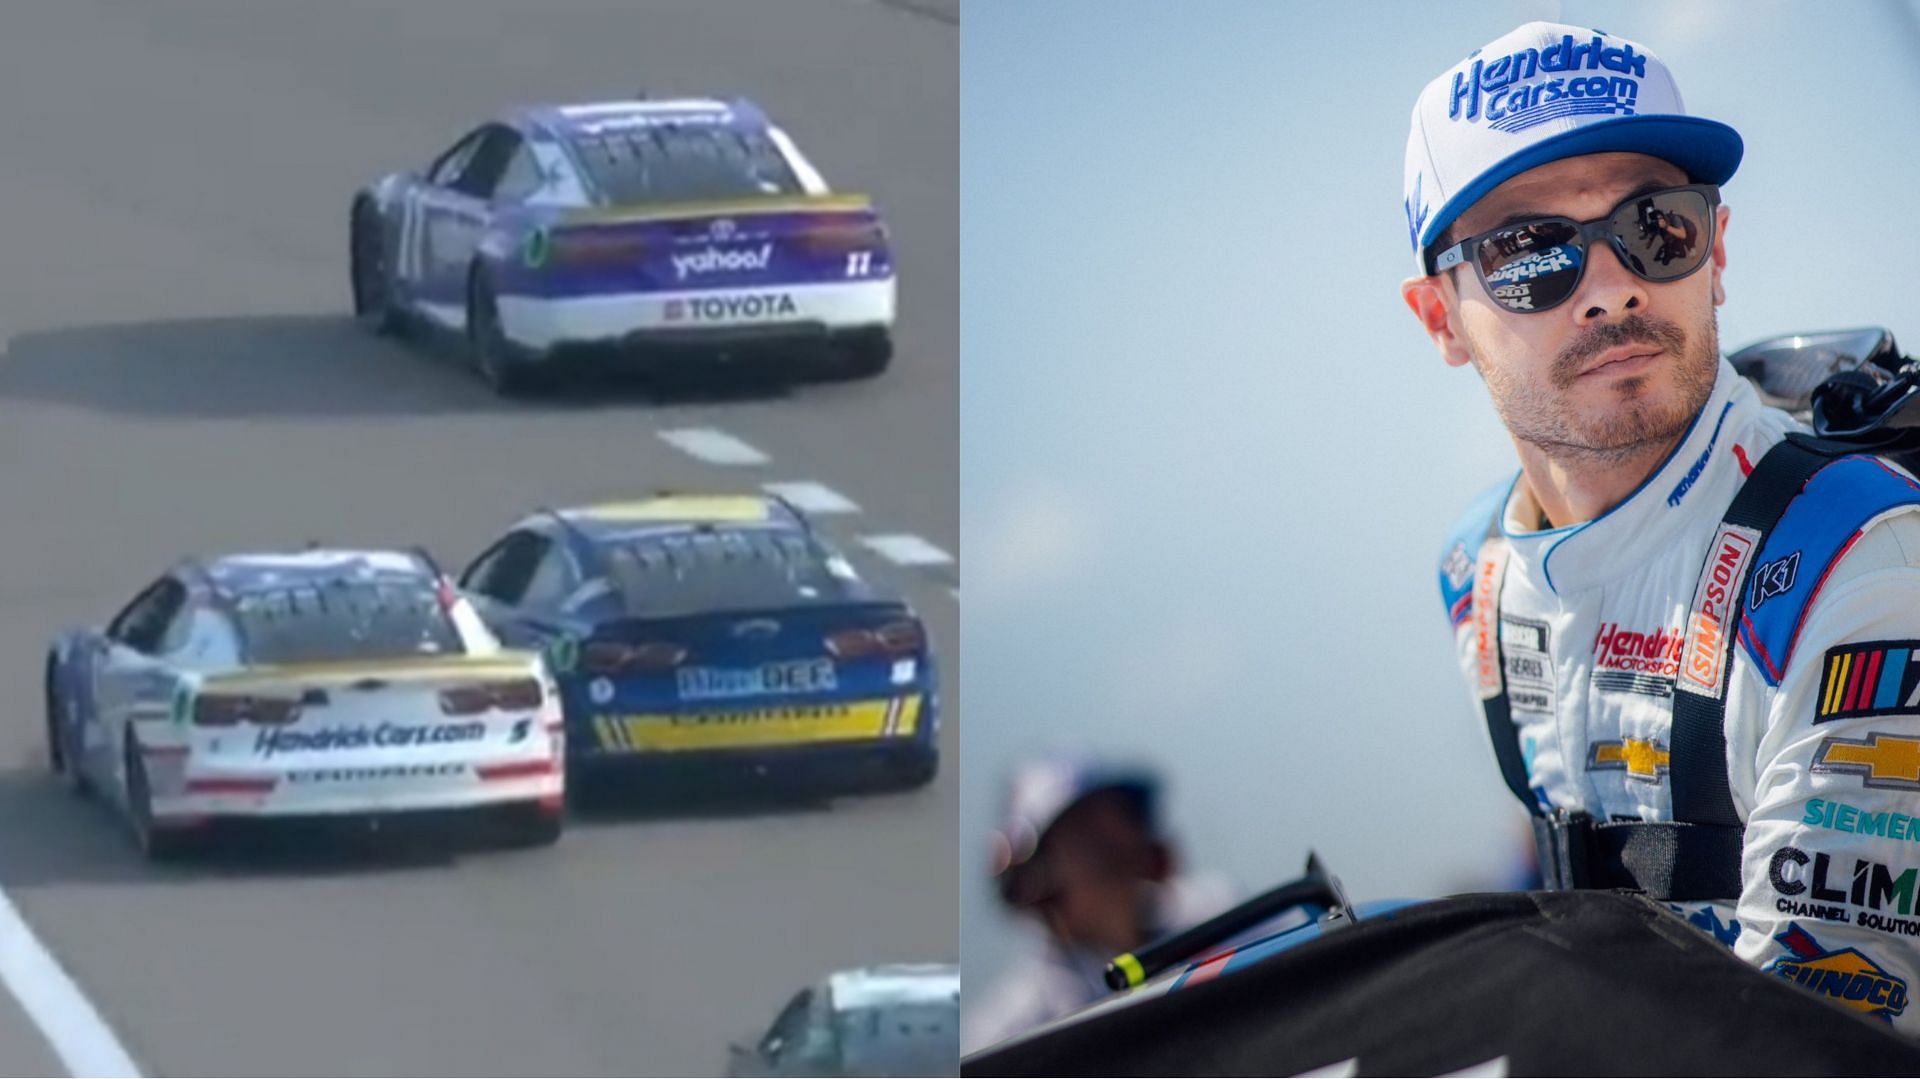 Kyle Larson reacts to his incident with Chase Elliott at the Kansas Speedway 